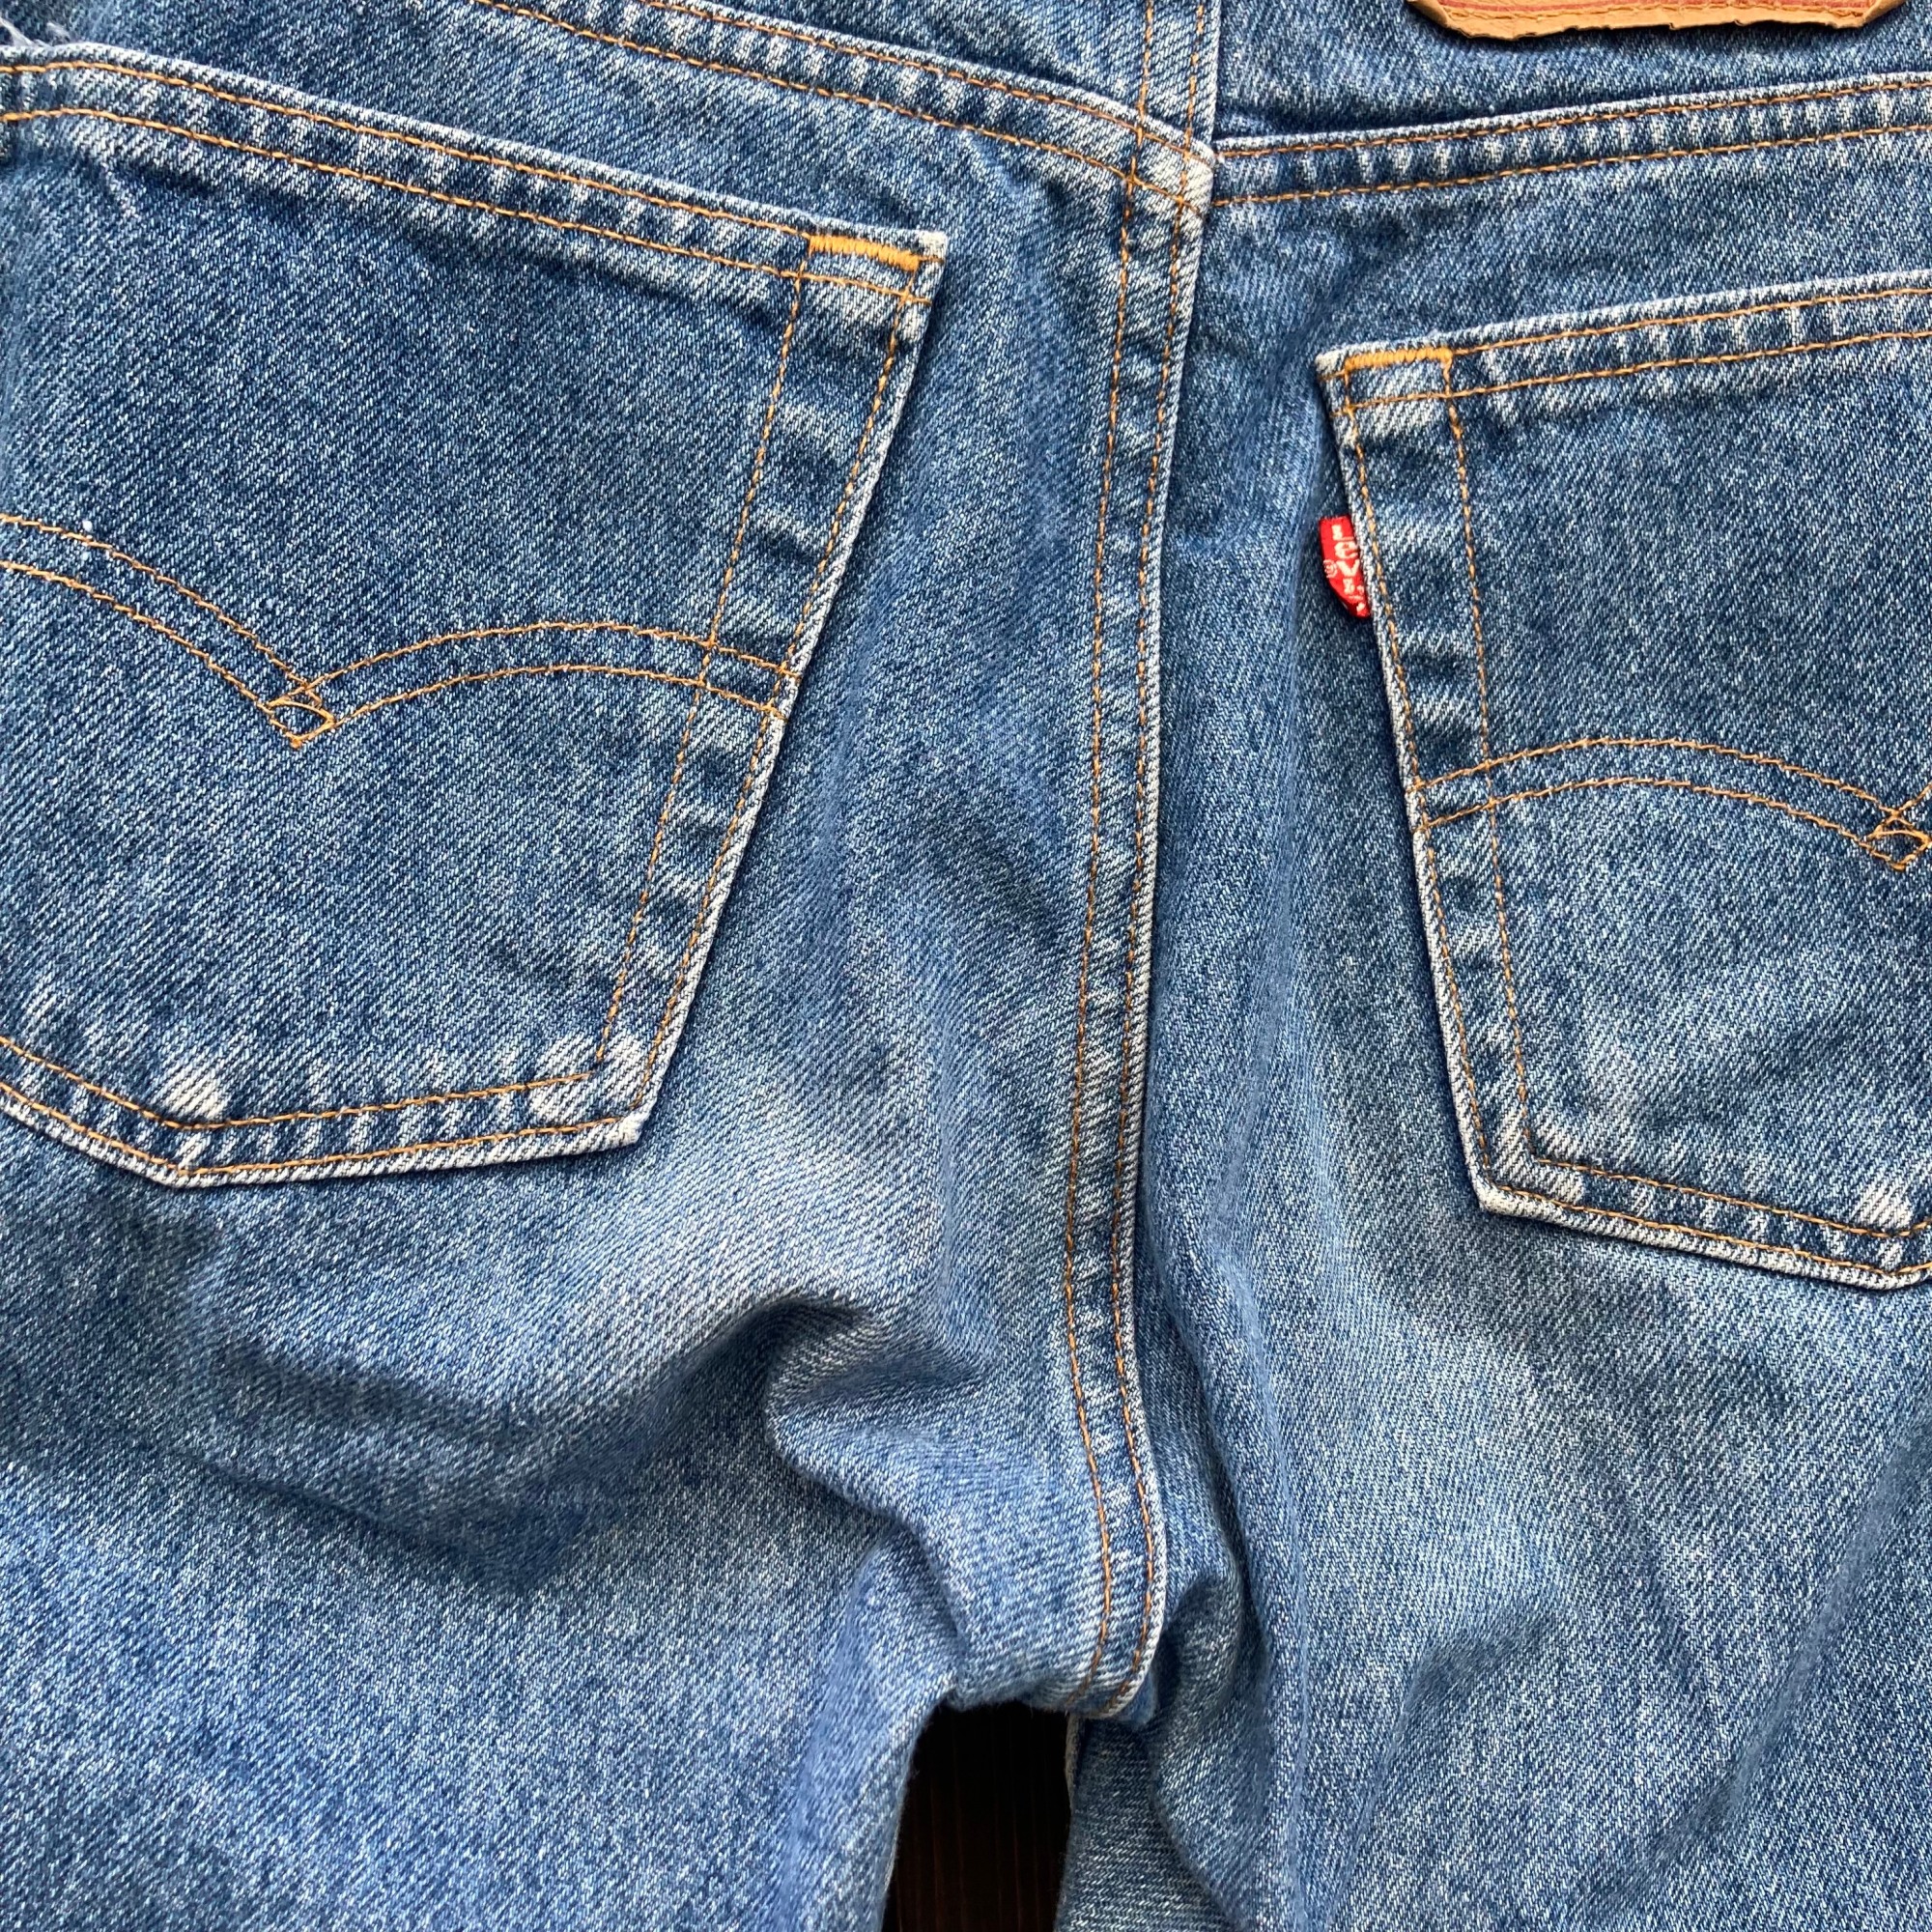 Made in USA Levi's 505 denim pants